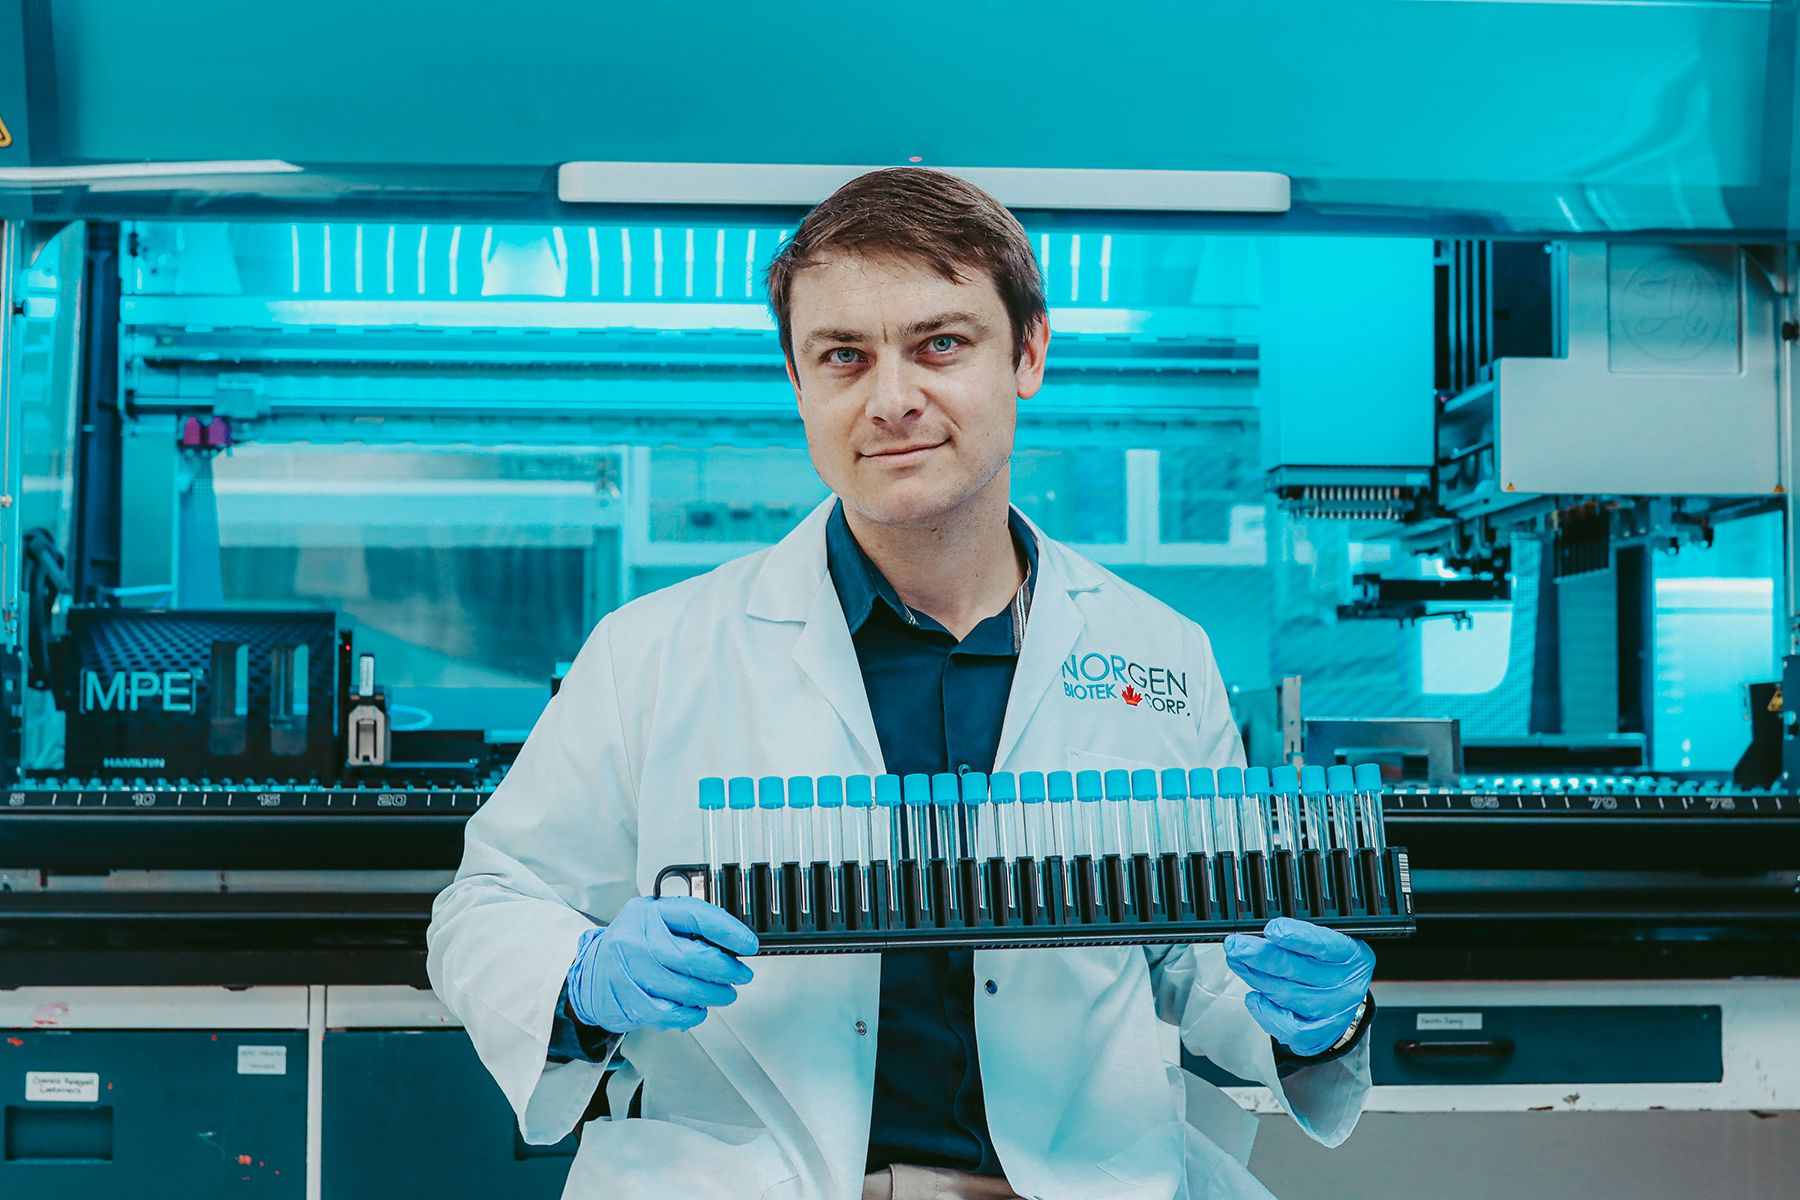 Norgen scientist holding row of columns ready for automation